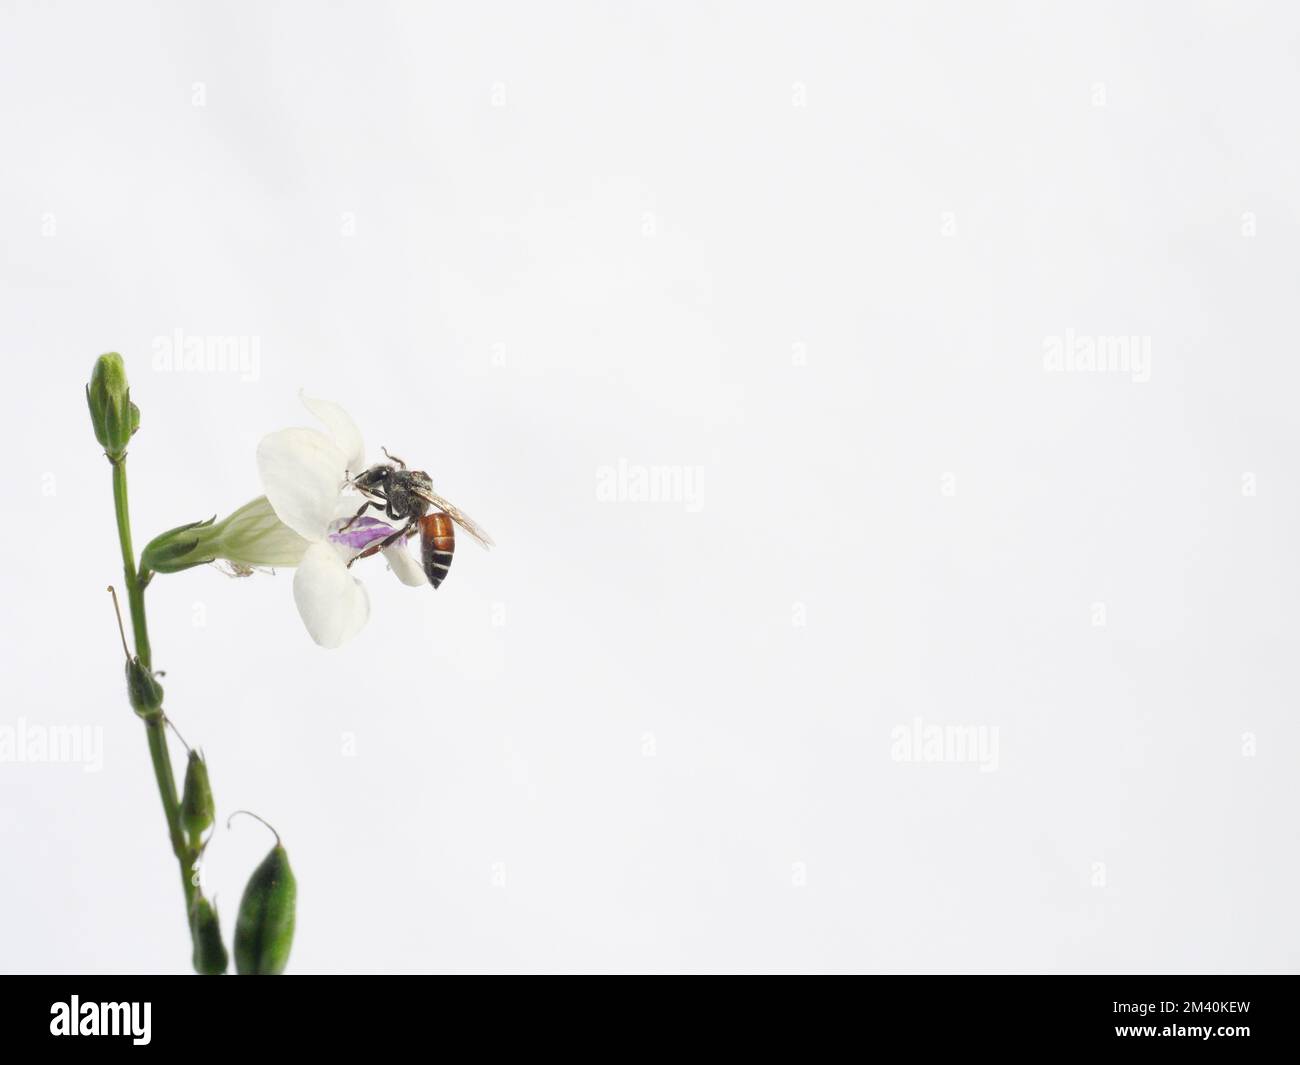 Red dwarf honey bee (Apis florea) seeking nectar on white Chinese violet or coromandel or creeping foxglove ( Asystasia gangetica ) blossom in field Stock Photo